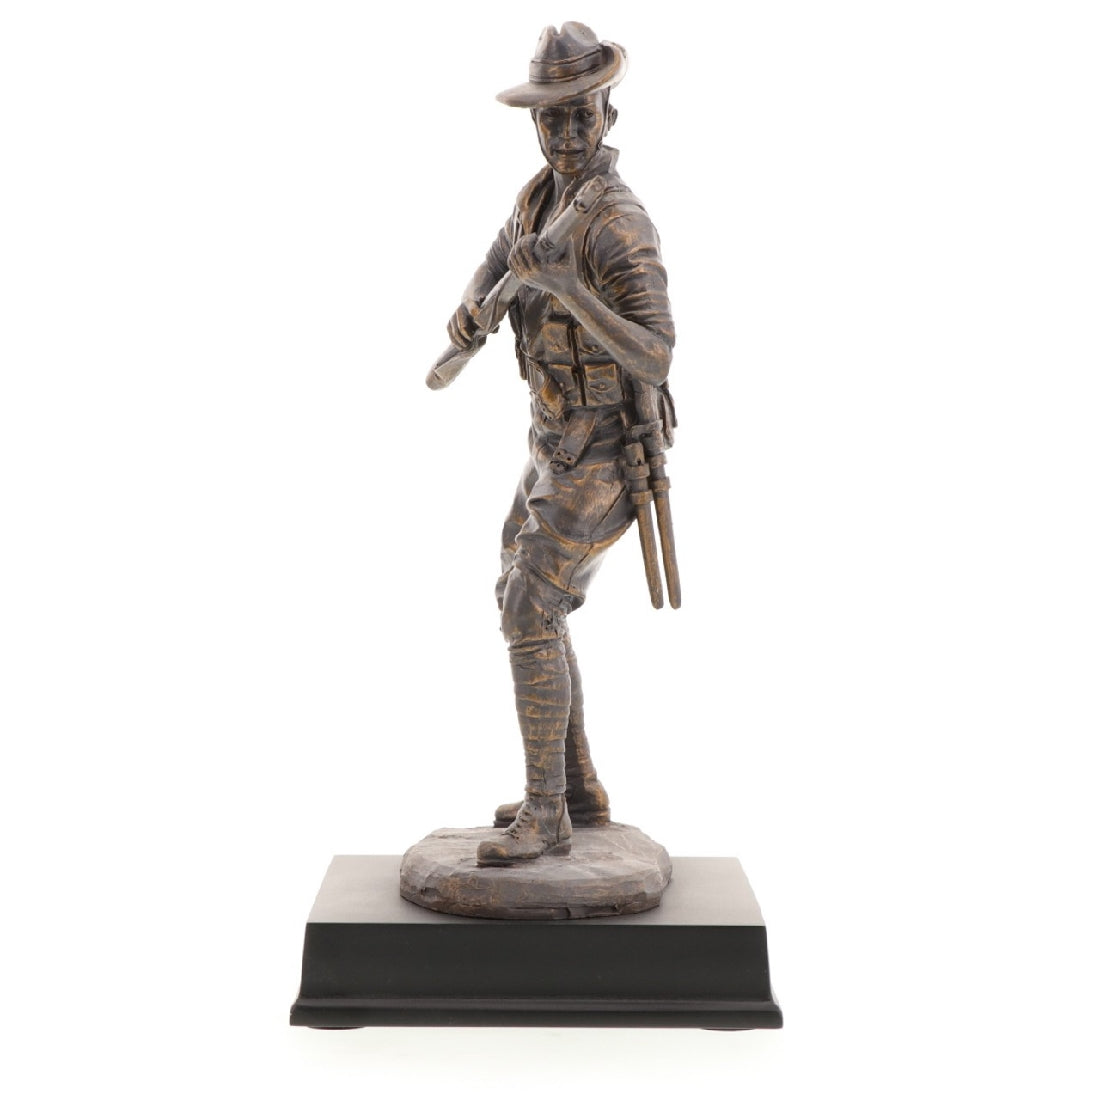 MASTER CREATIONS WWI DIGGER FIGURINE 31CM